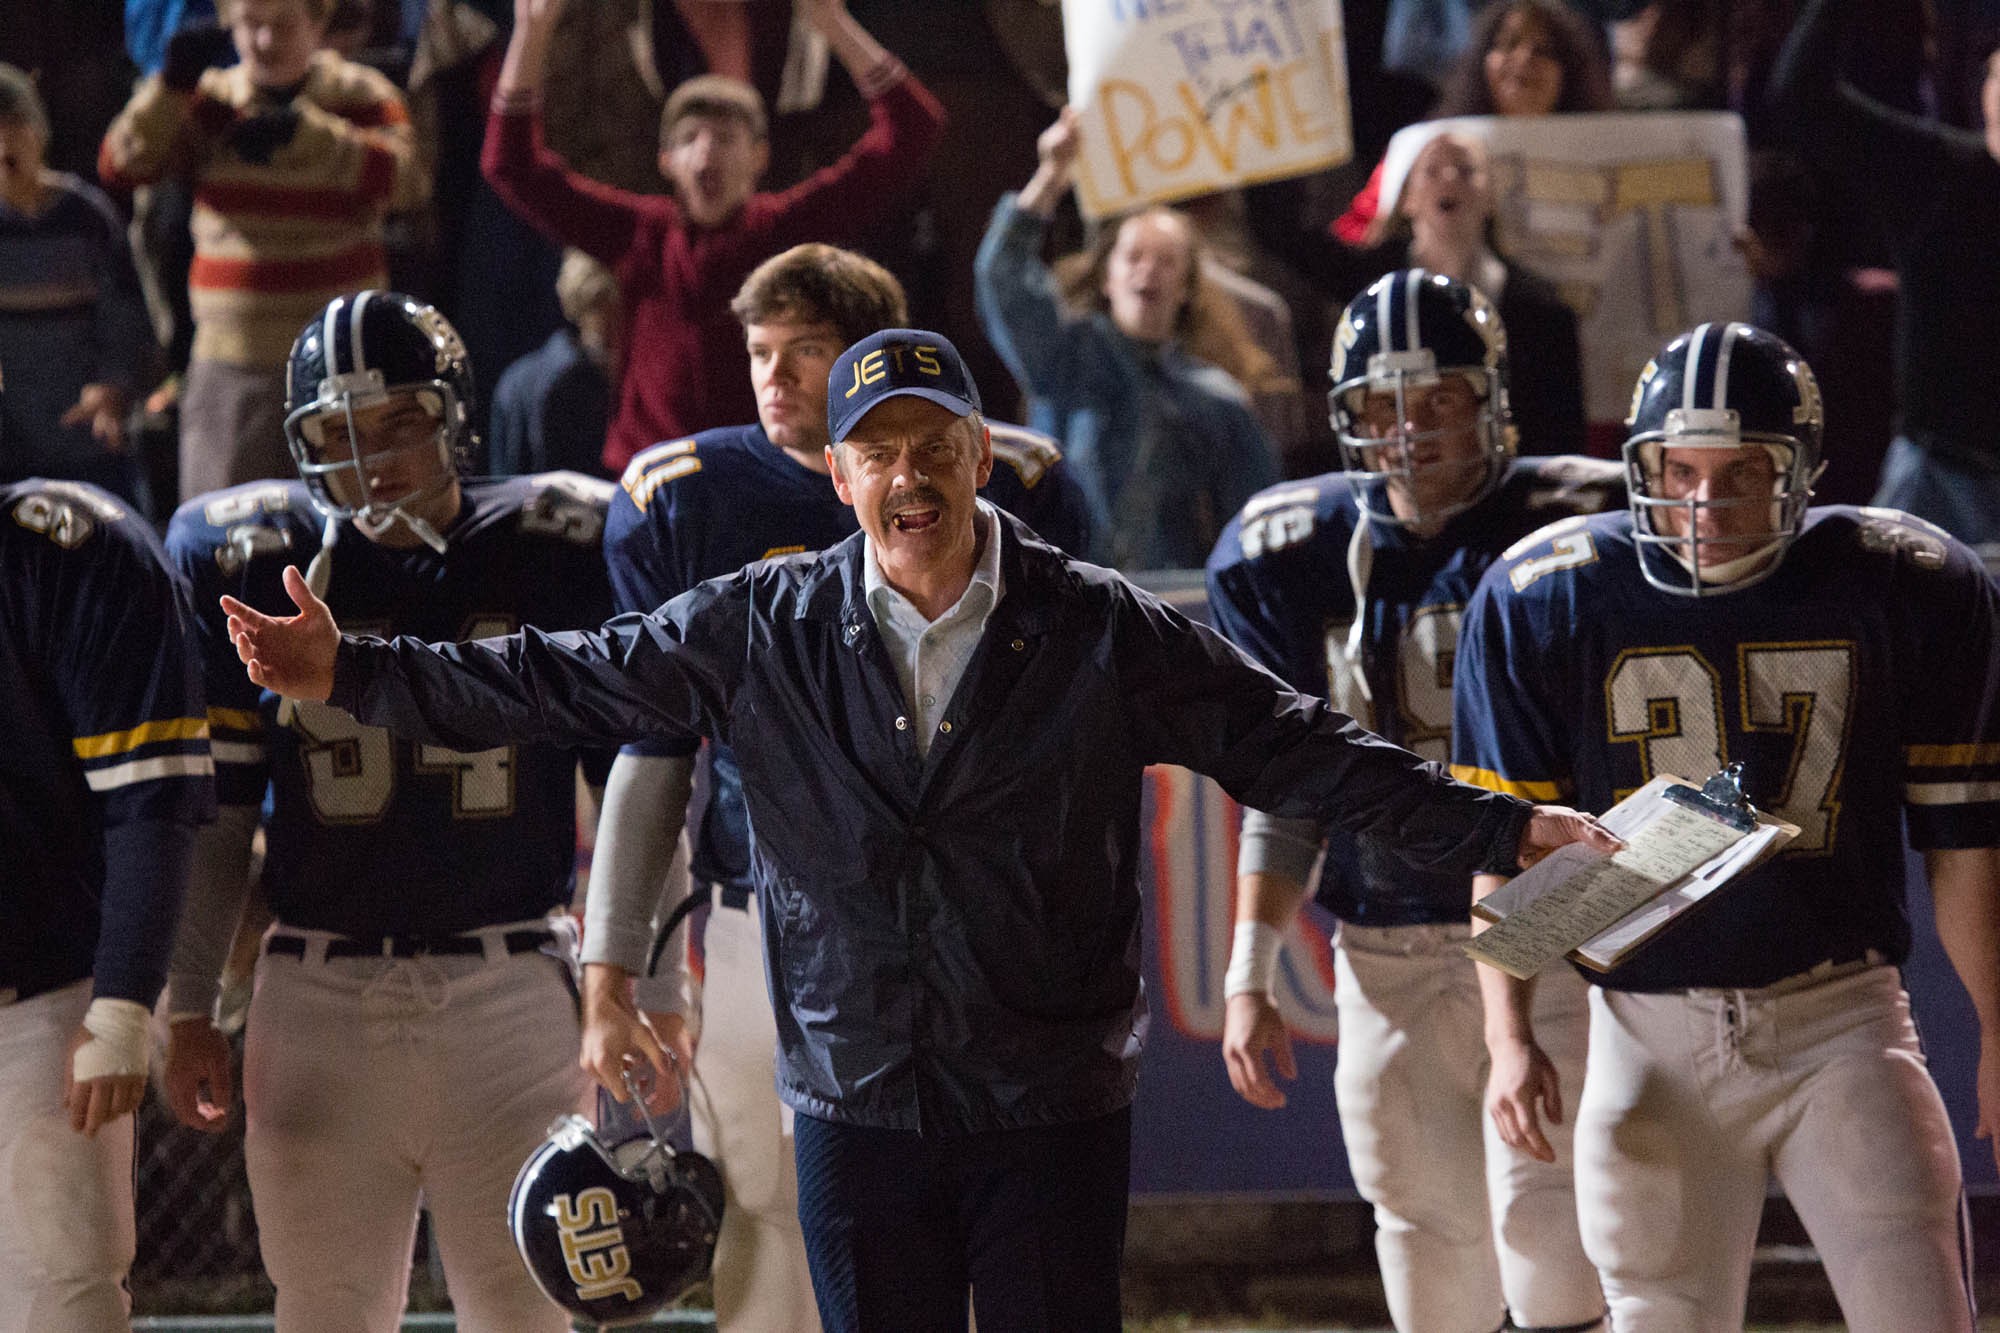 C. Thomas Howell stars as George 'Shorty' White in Pure Flix Entertainment's Woodlawn (2015)